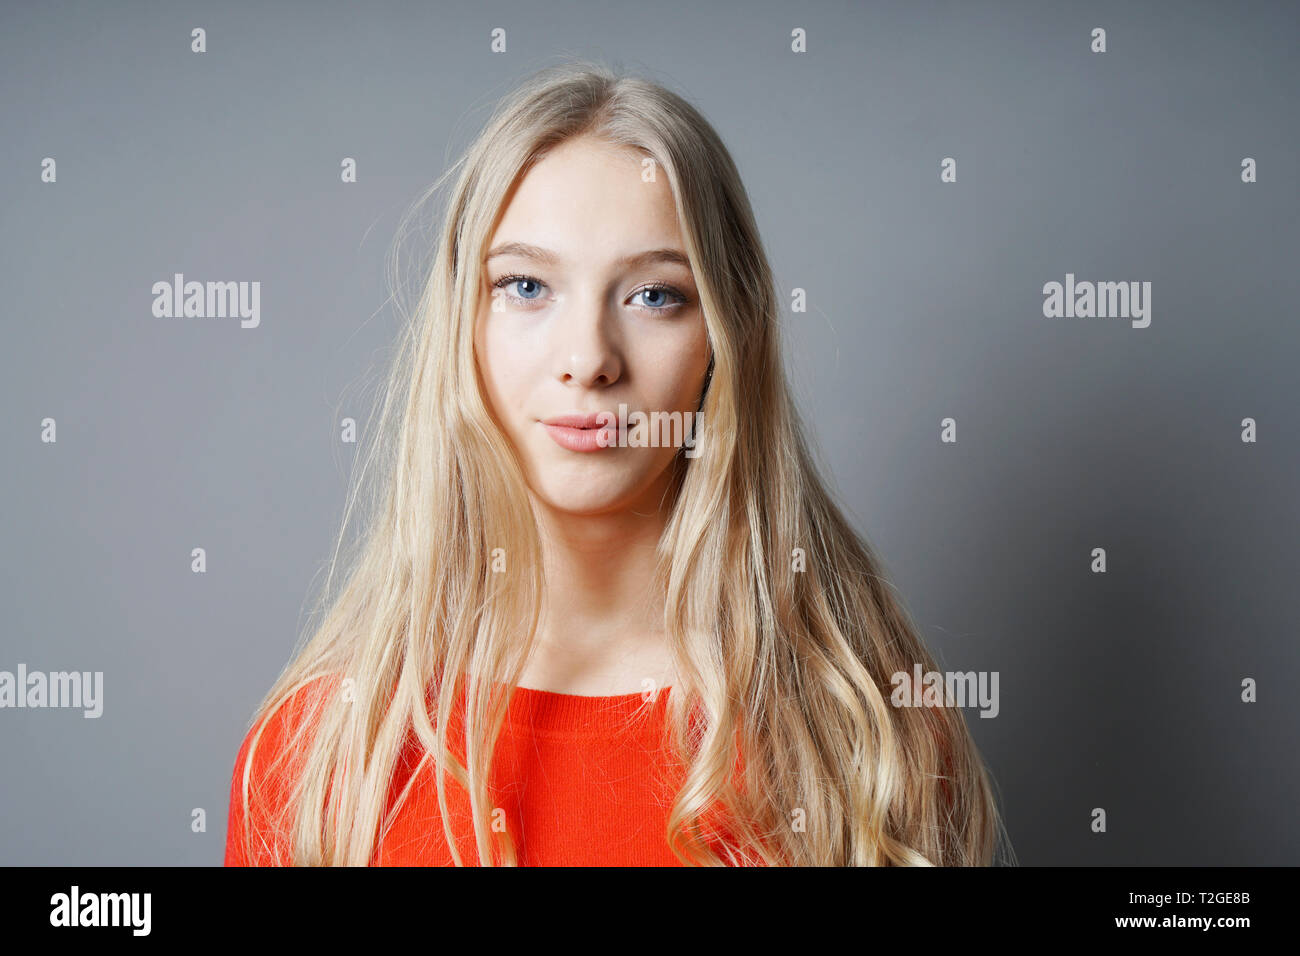 Young Teenage Woman With Long Blond Hair Pale Skin And Blue Eyes